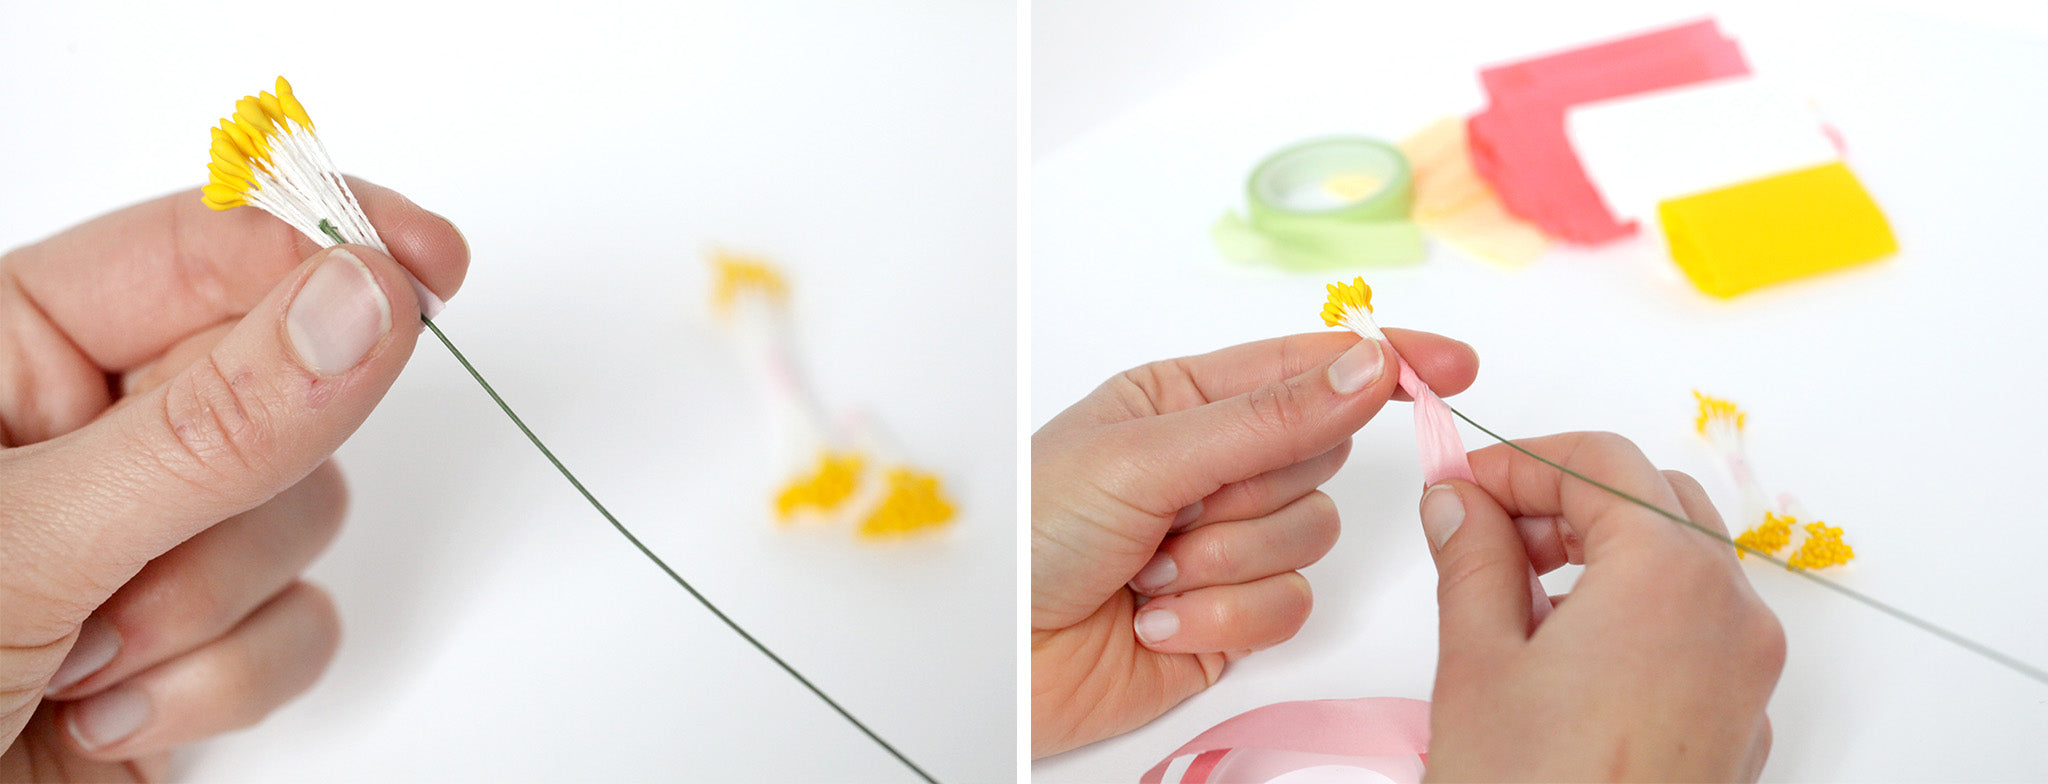 article-blog-tips-making-flowers-paper-hand-gesture